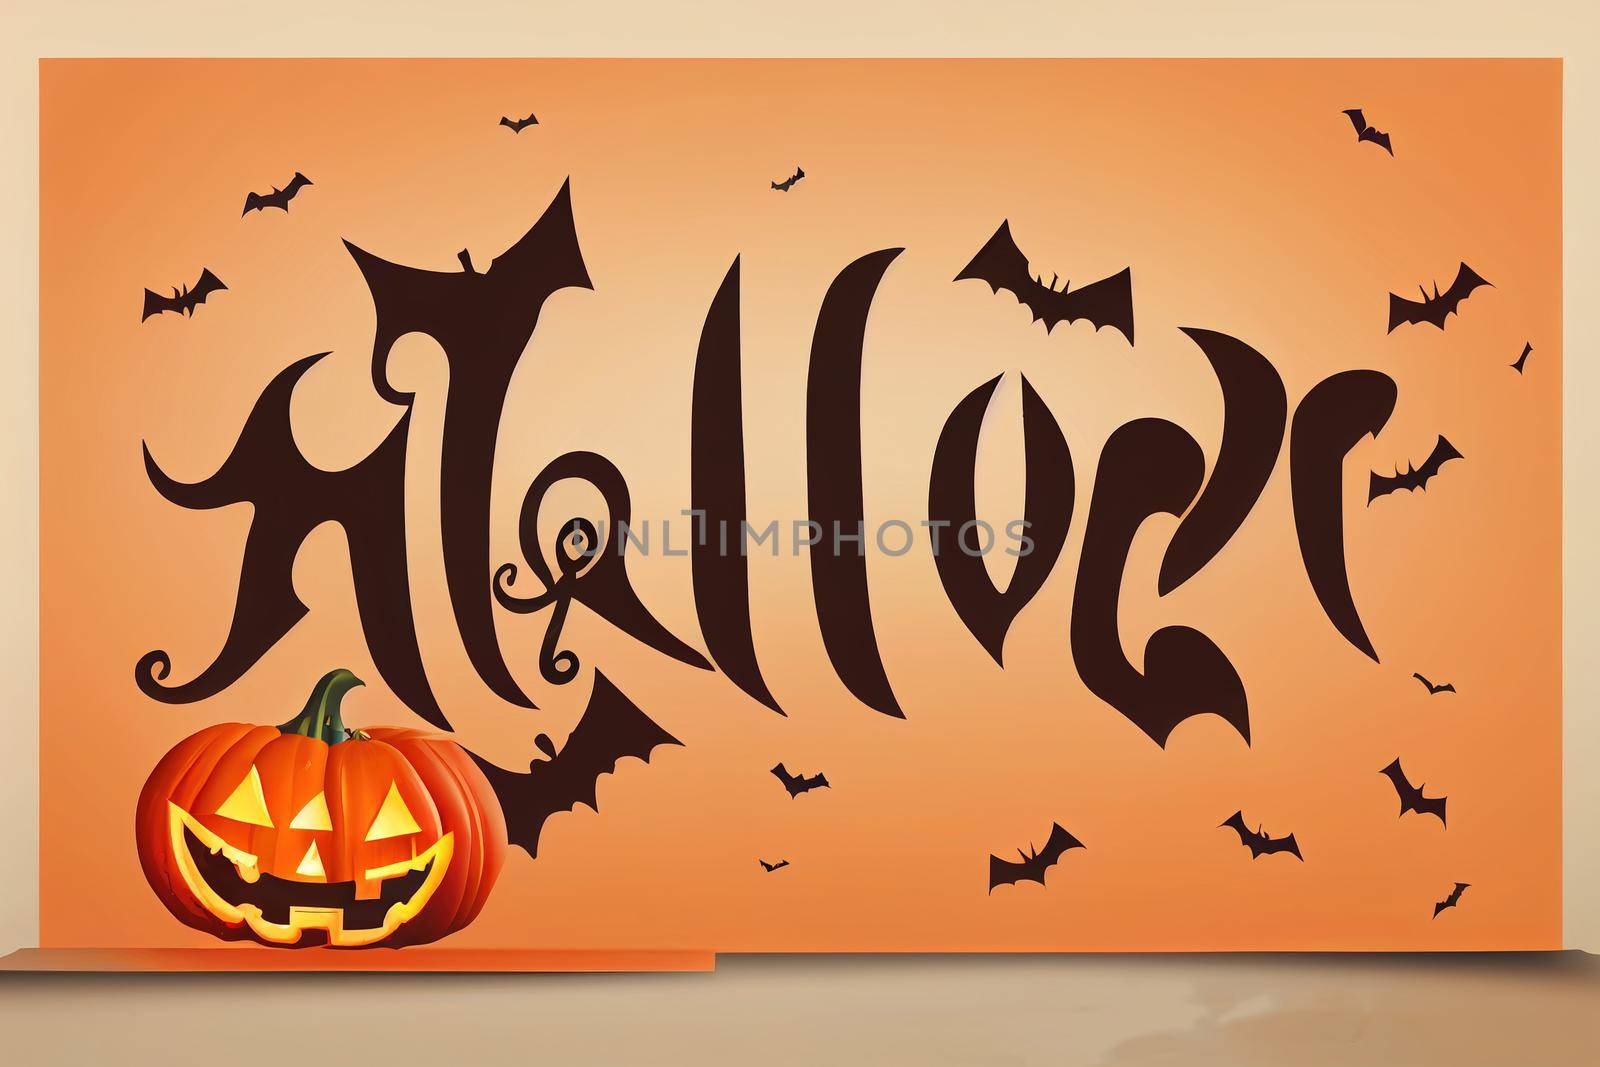 Halloween Decorative Border made of Festive Elements Background and by 2ragon